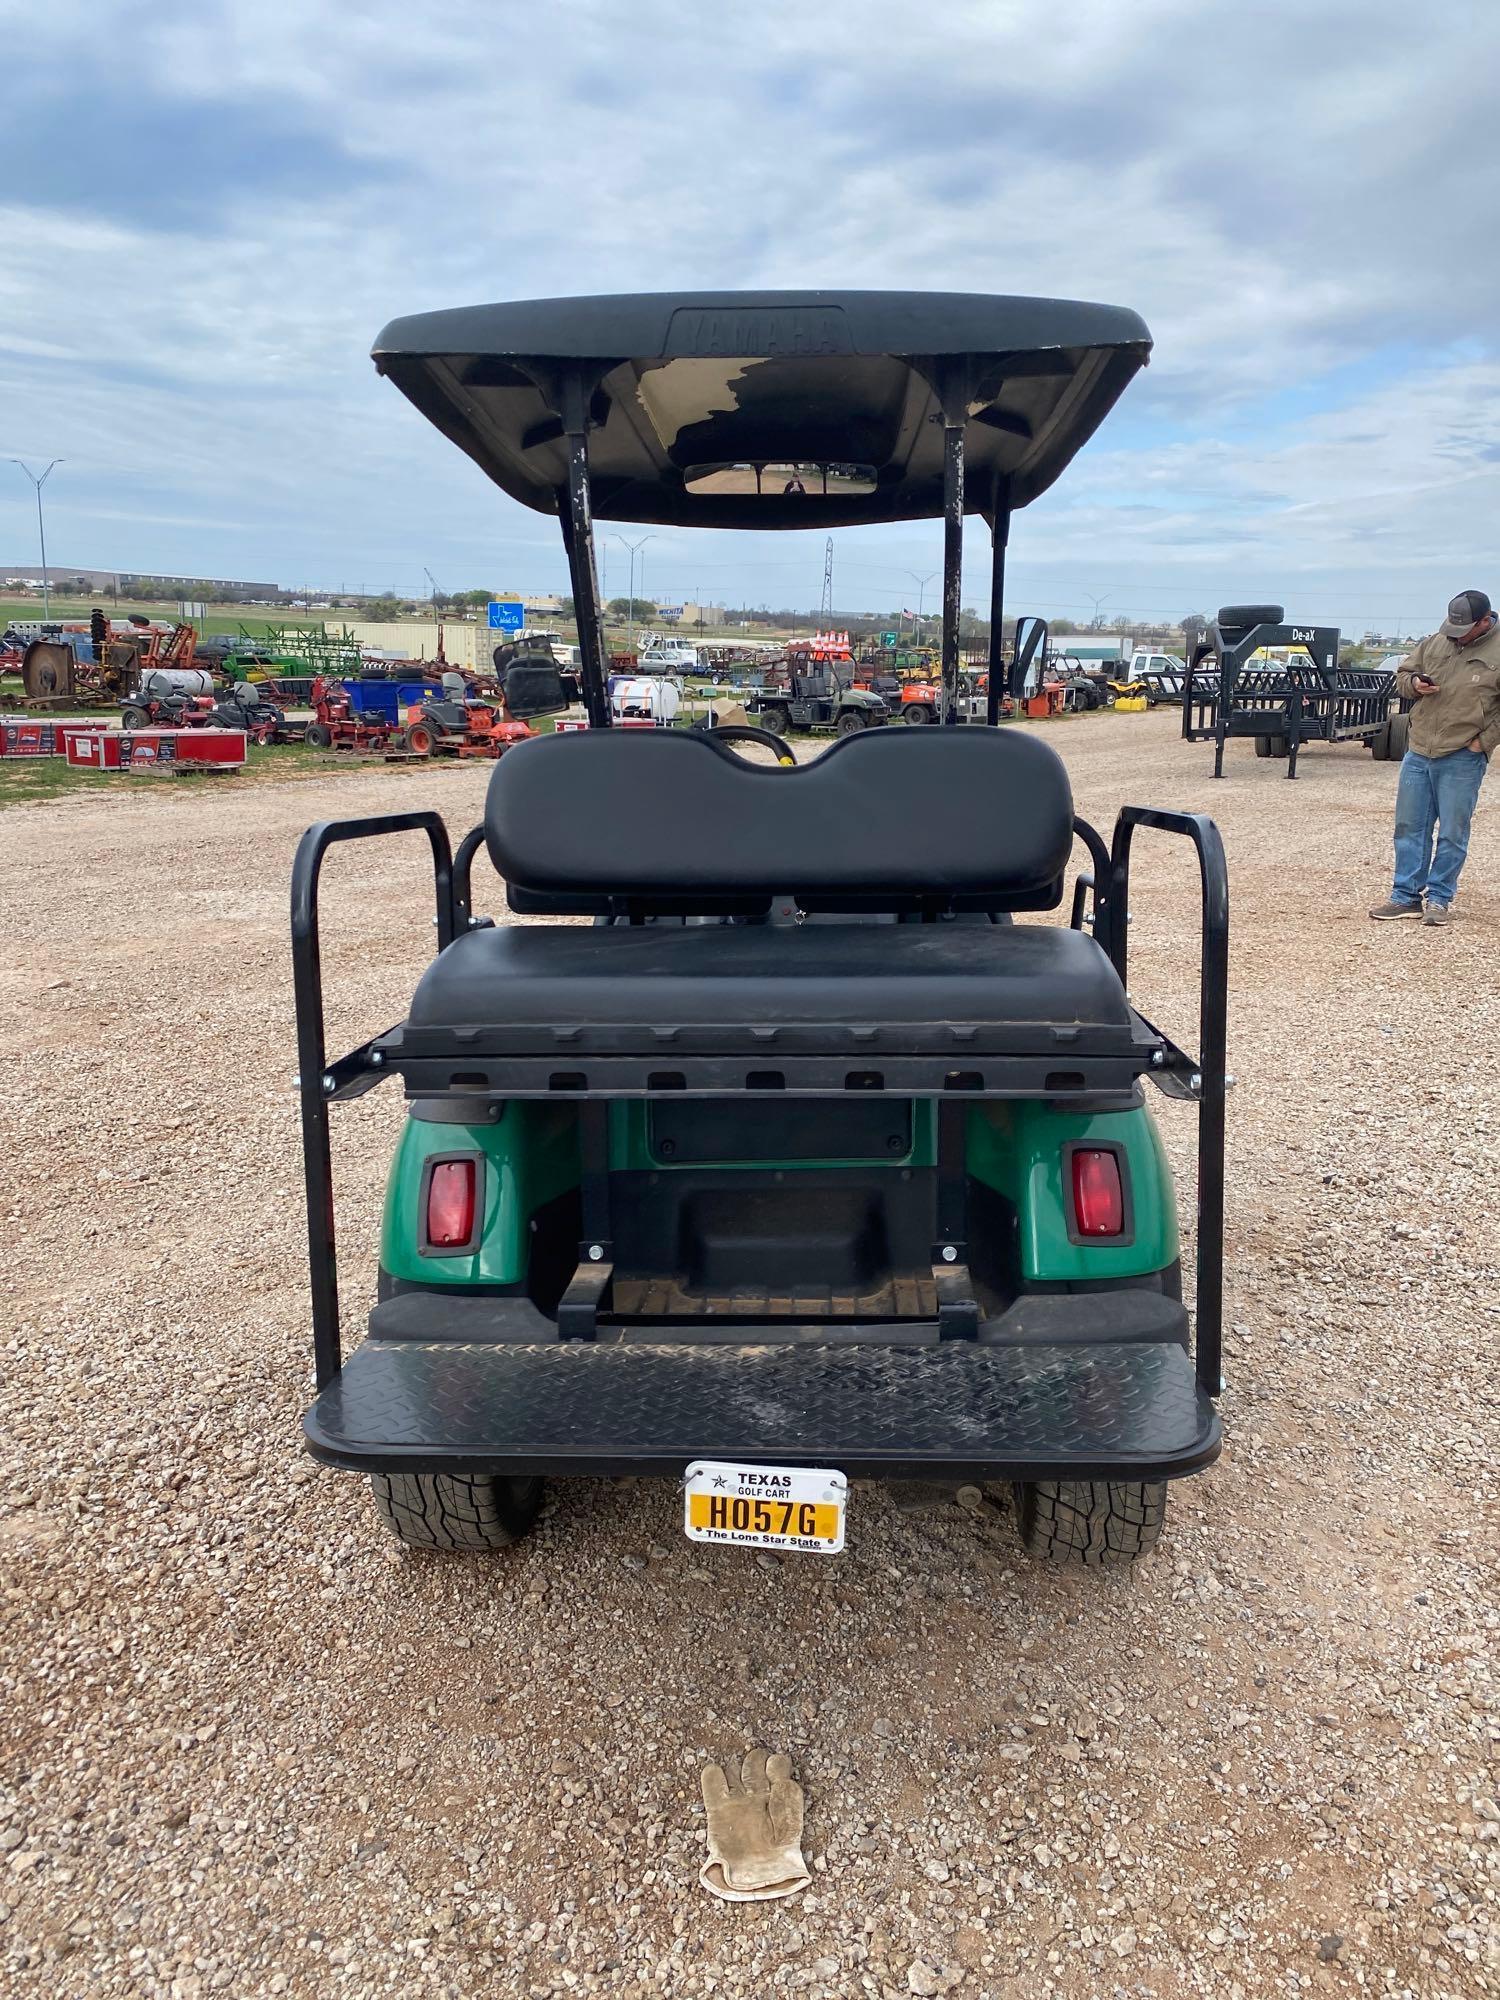 YAMAHA 2002 GOLF CART NEW TIRES, BENCH IN REAR FOLDS INTO A SEAT ELEC/OVER GAS POWERED ???????SELLS